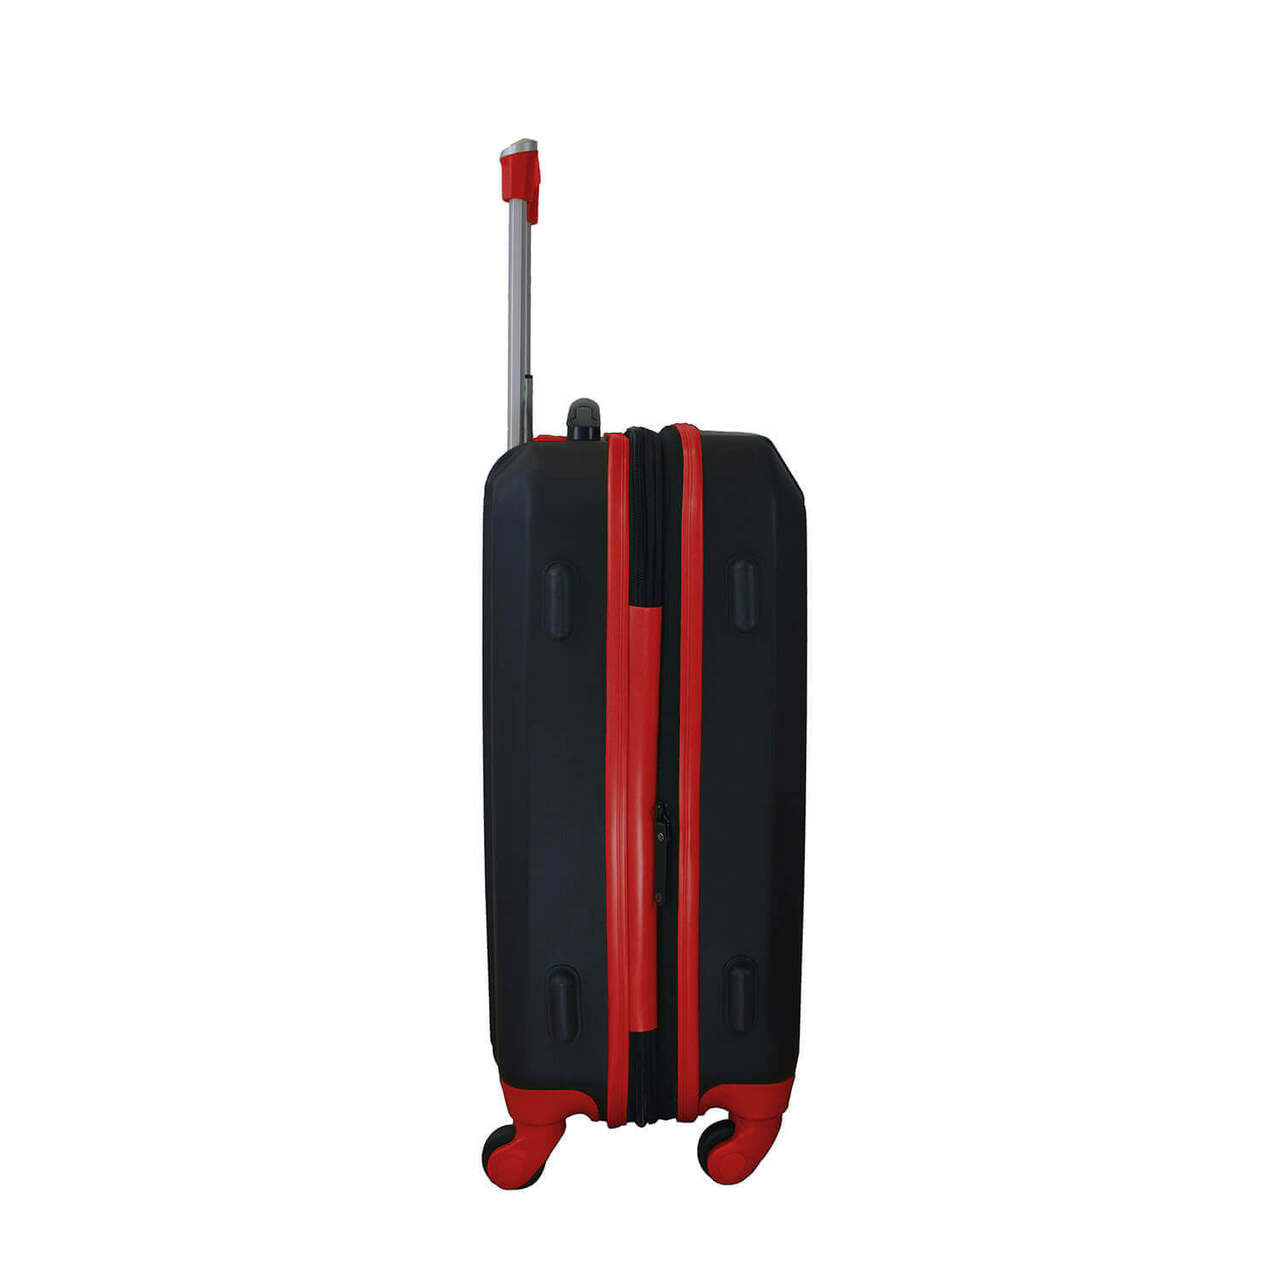 Team USA Carry On Spinner Luggage | Olympics Team USA Hardcase Two-Tone Luggage Carry-on Spinner in Red